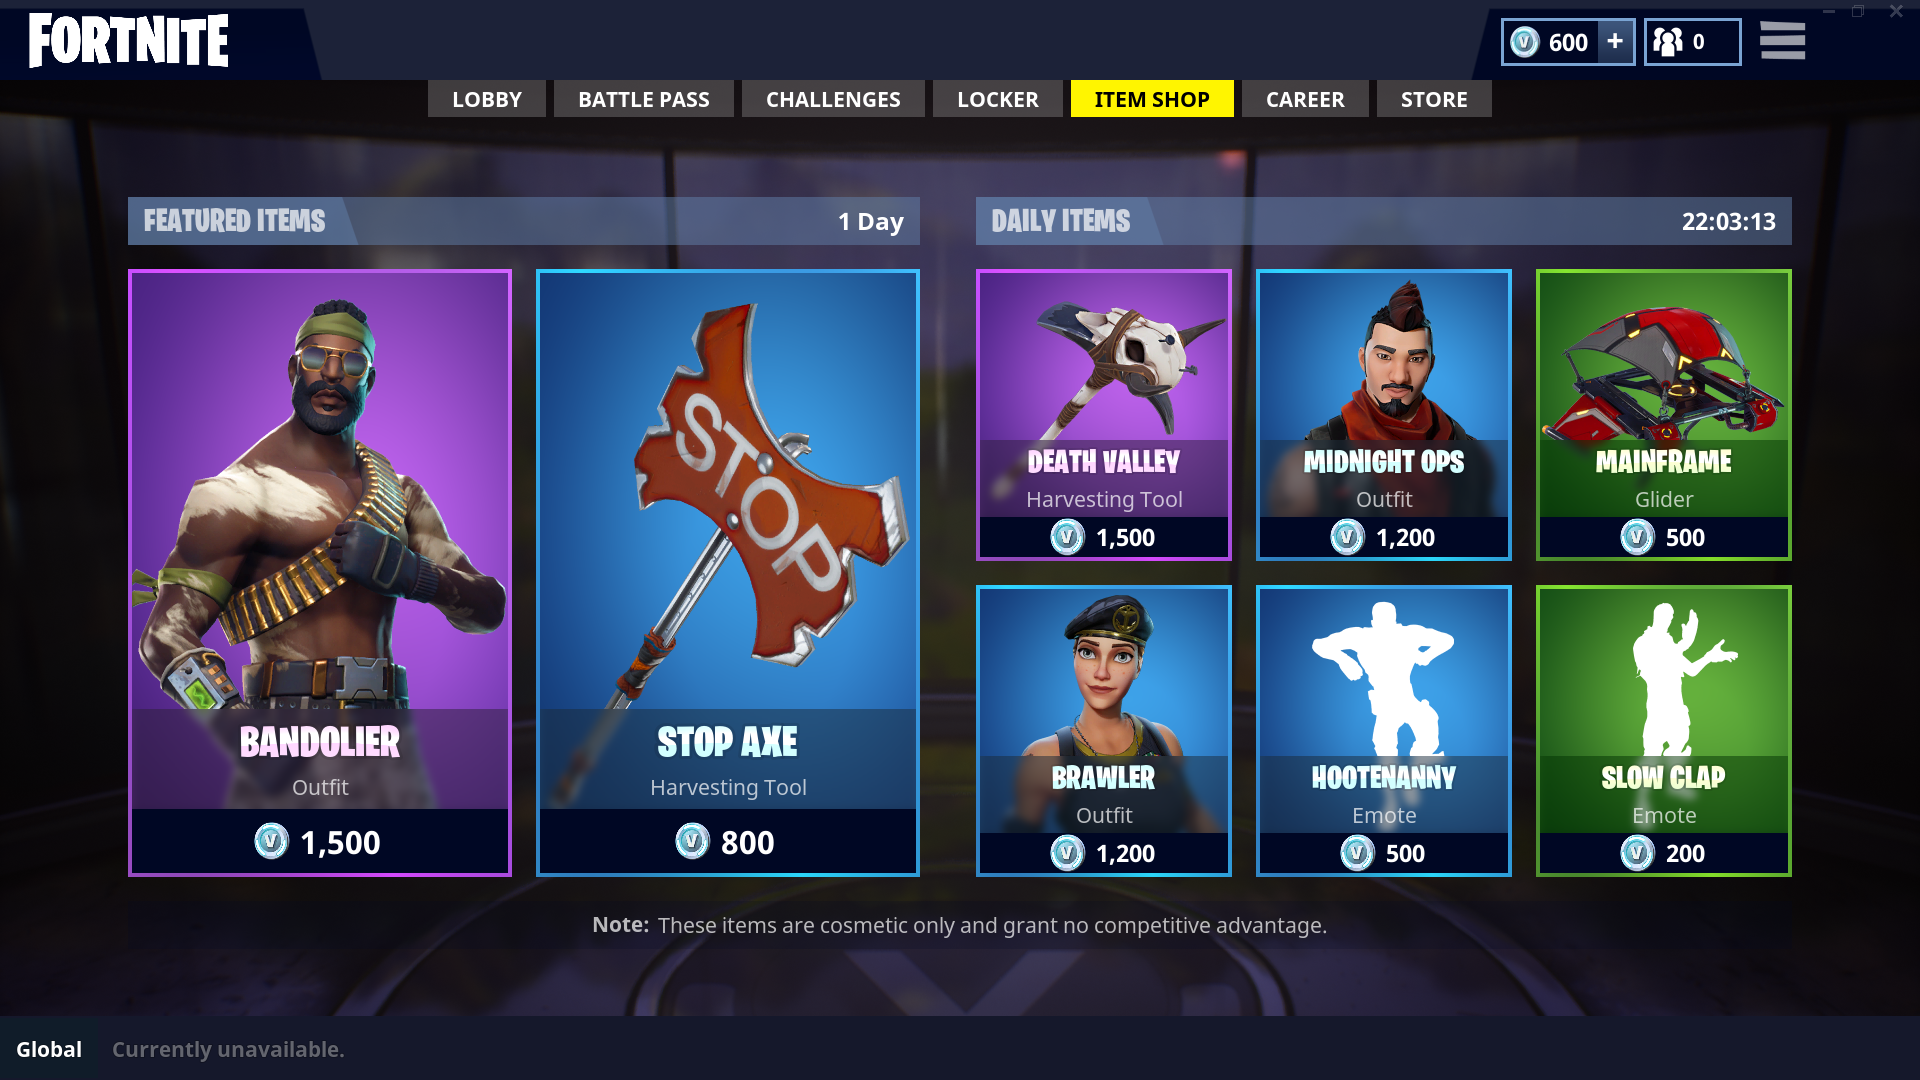 'Fortnite' Bandolier Added to Item Shop: We're All ... - 1920 x 1080 png 1272kB